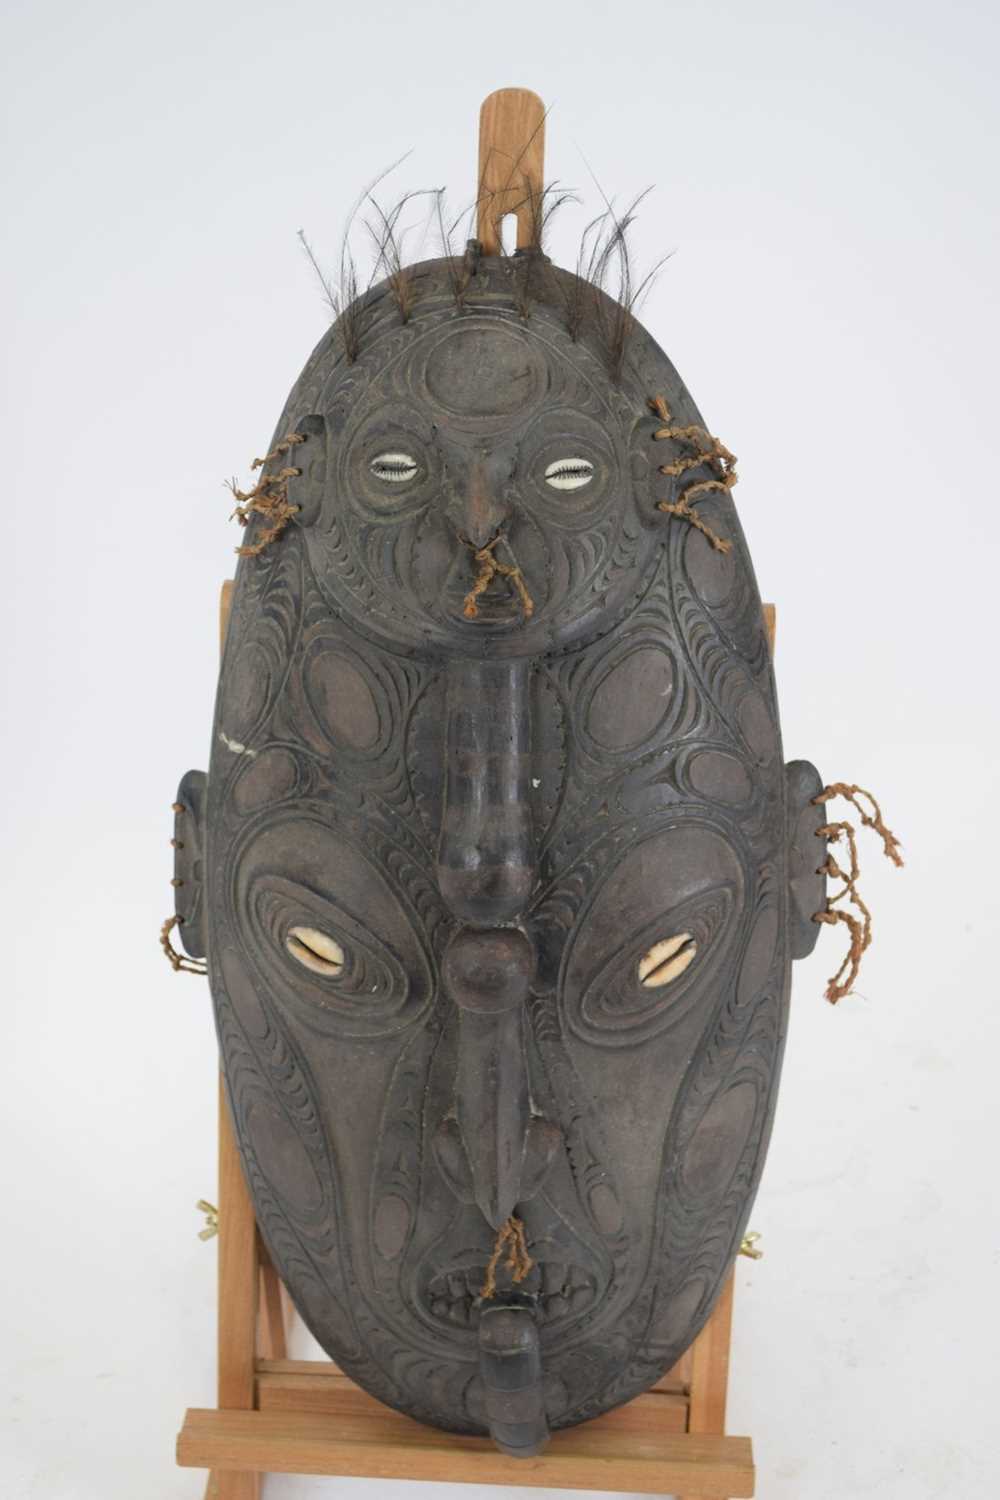 Tribal/ethnographica interest - Papua New Guinea oval mask with two anthropomorphic faces set with